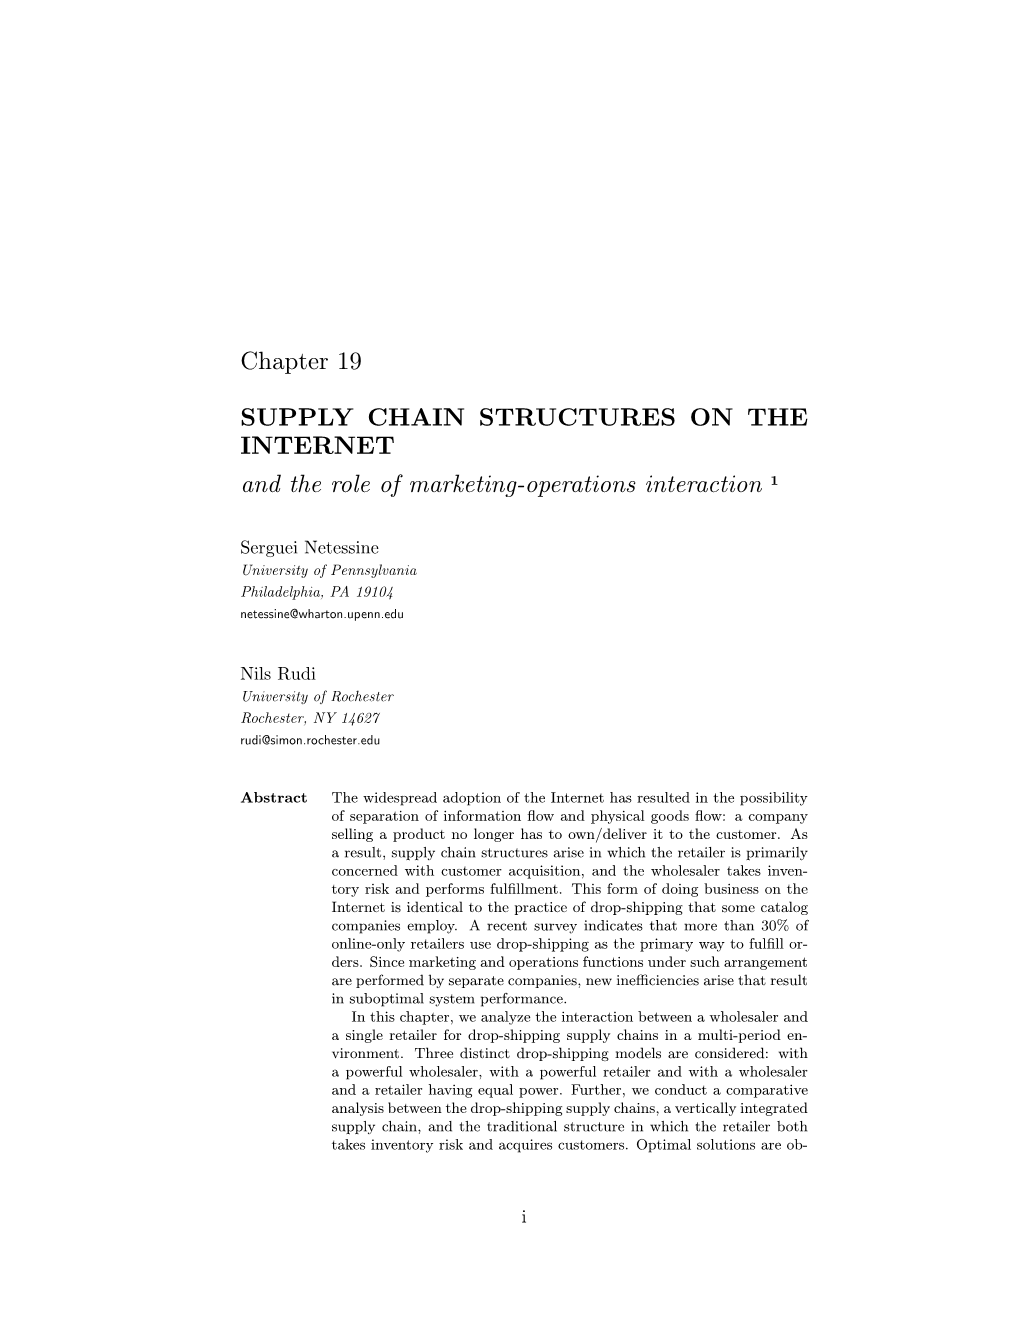 Chapter 19 SUPPLY CHAIN STRUCTURES on the INTERNET